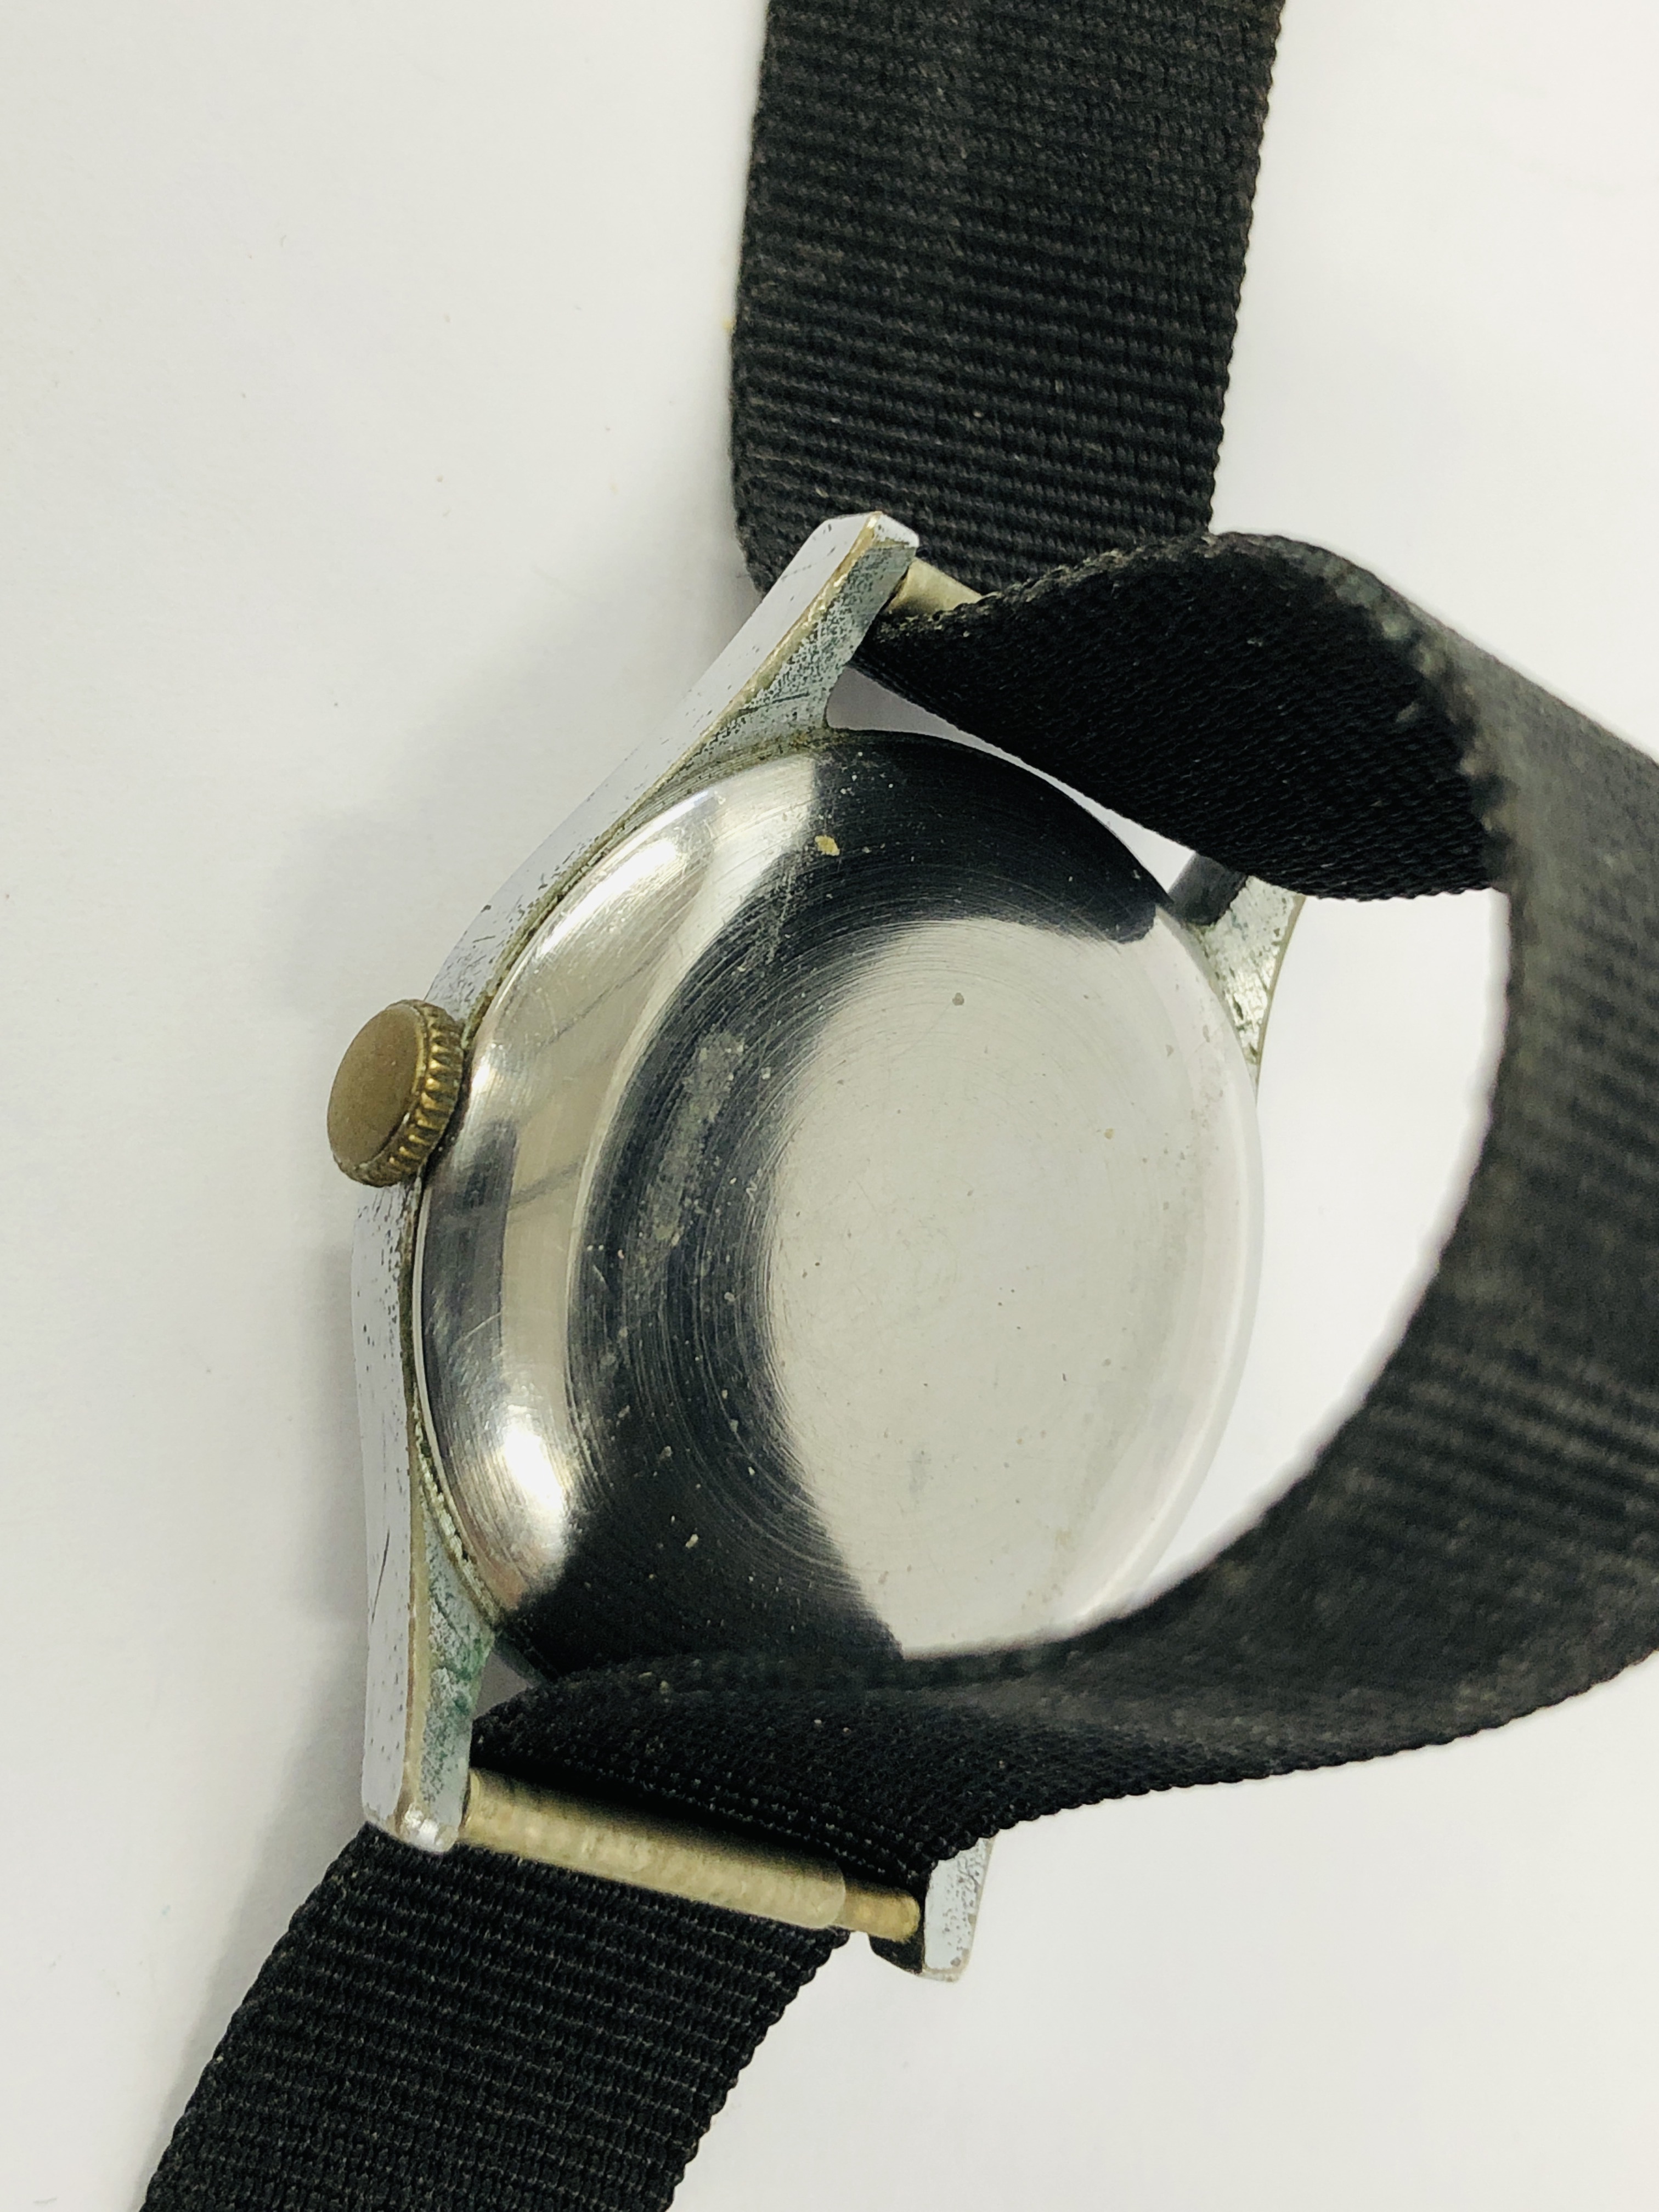 VINTAGE WRIST WATCH MARKED "HELVETIA" SWISS MADE, - Image 6 of 8